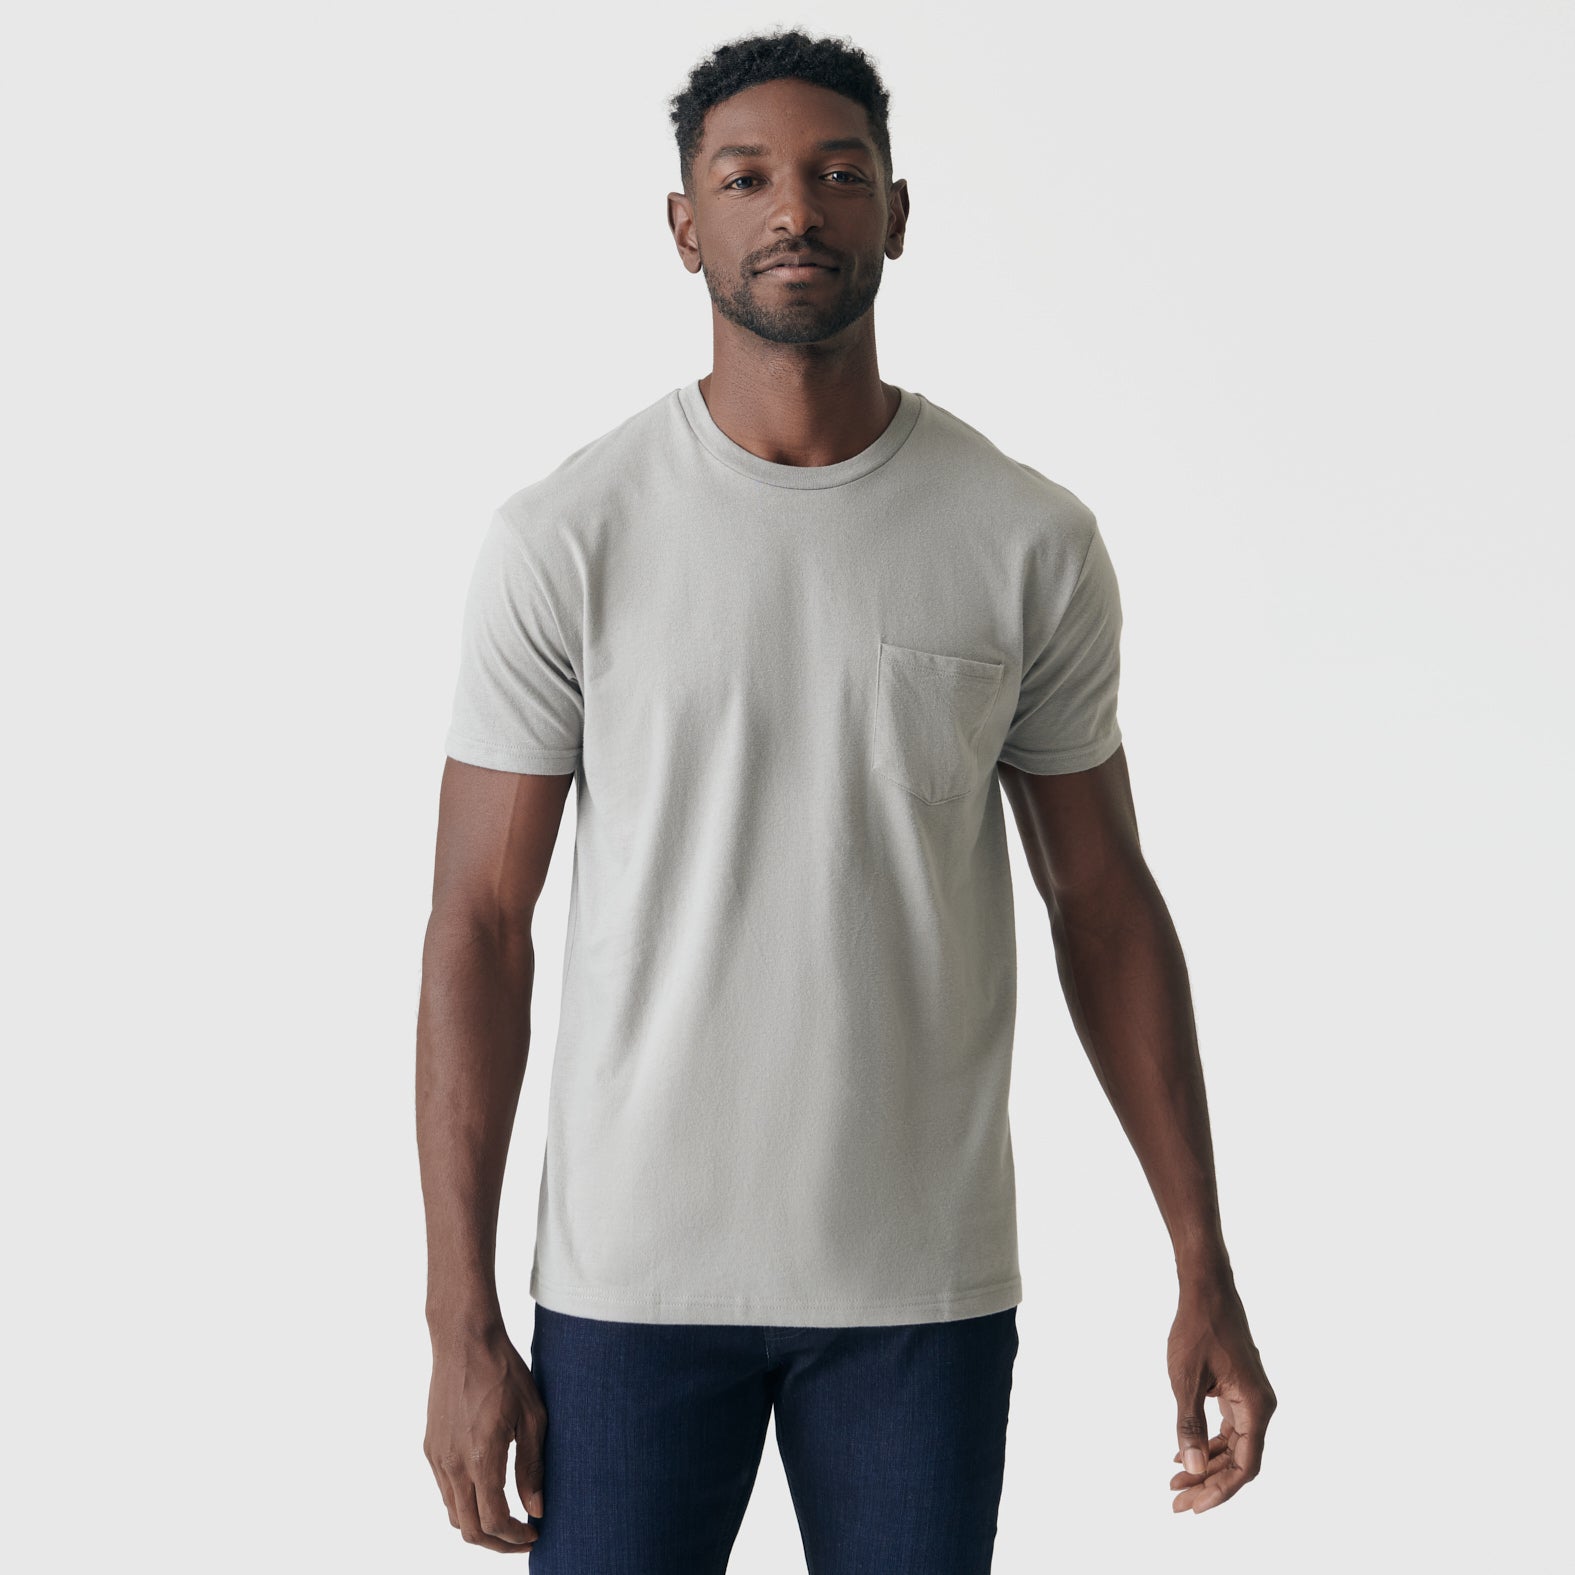 Couple More Days Construction - Black Pocket Tee – Dude Dad